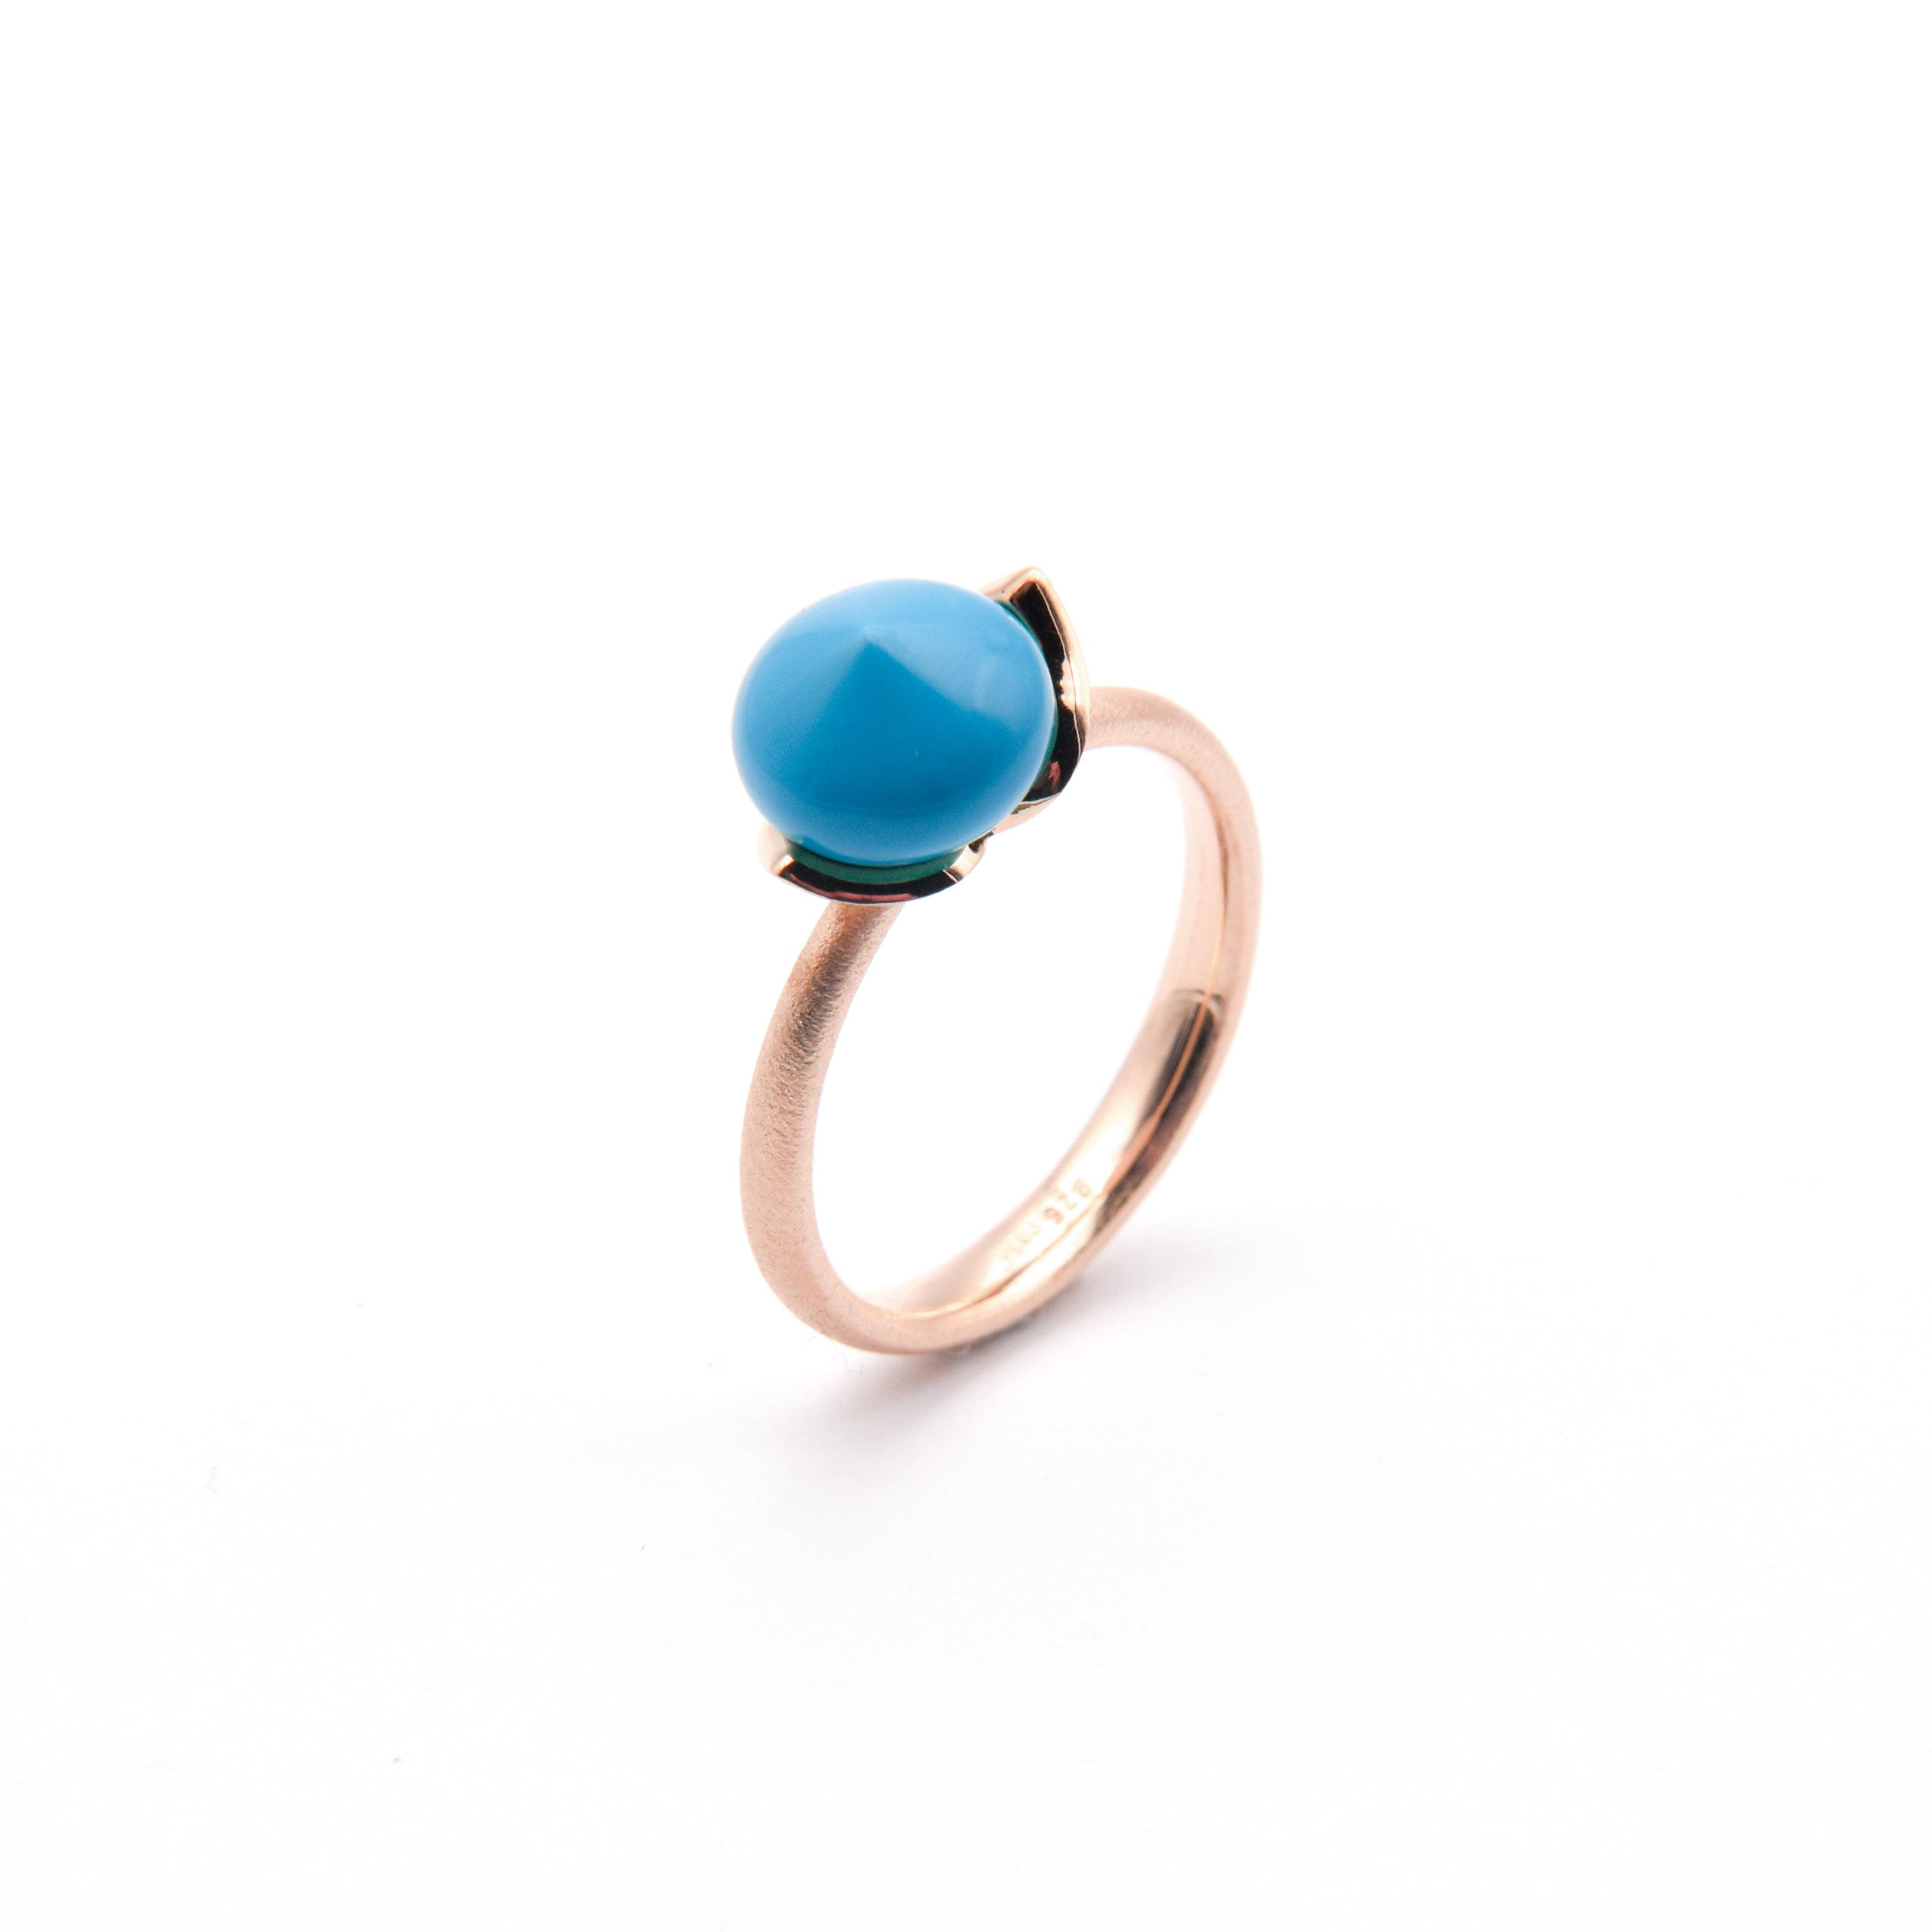 Dolce ring "smal" with turquoise rec. 925/-